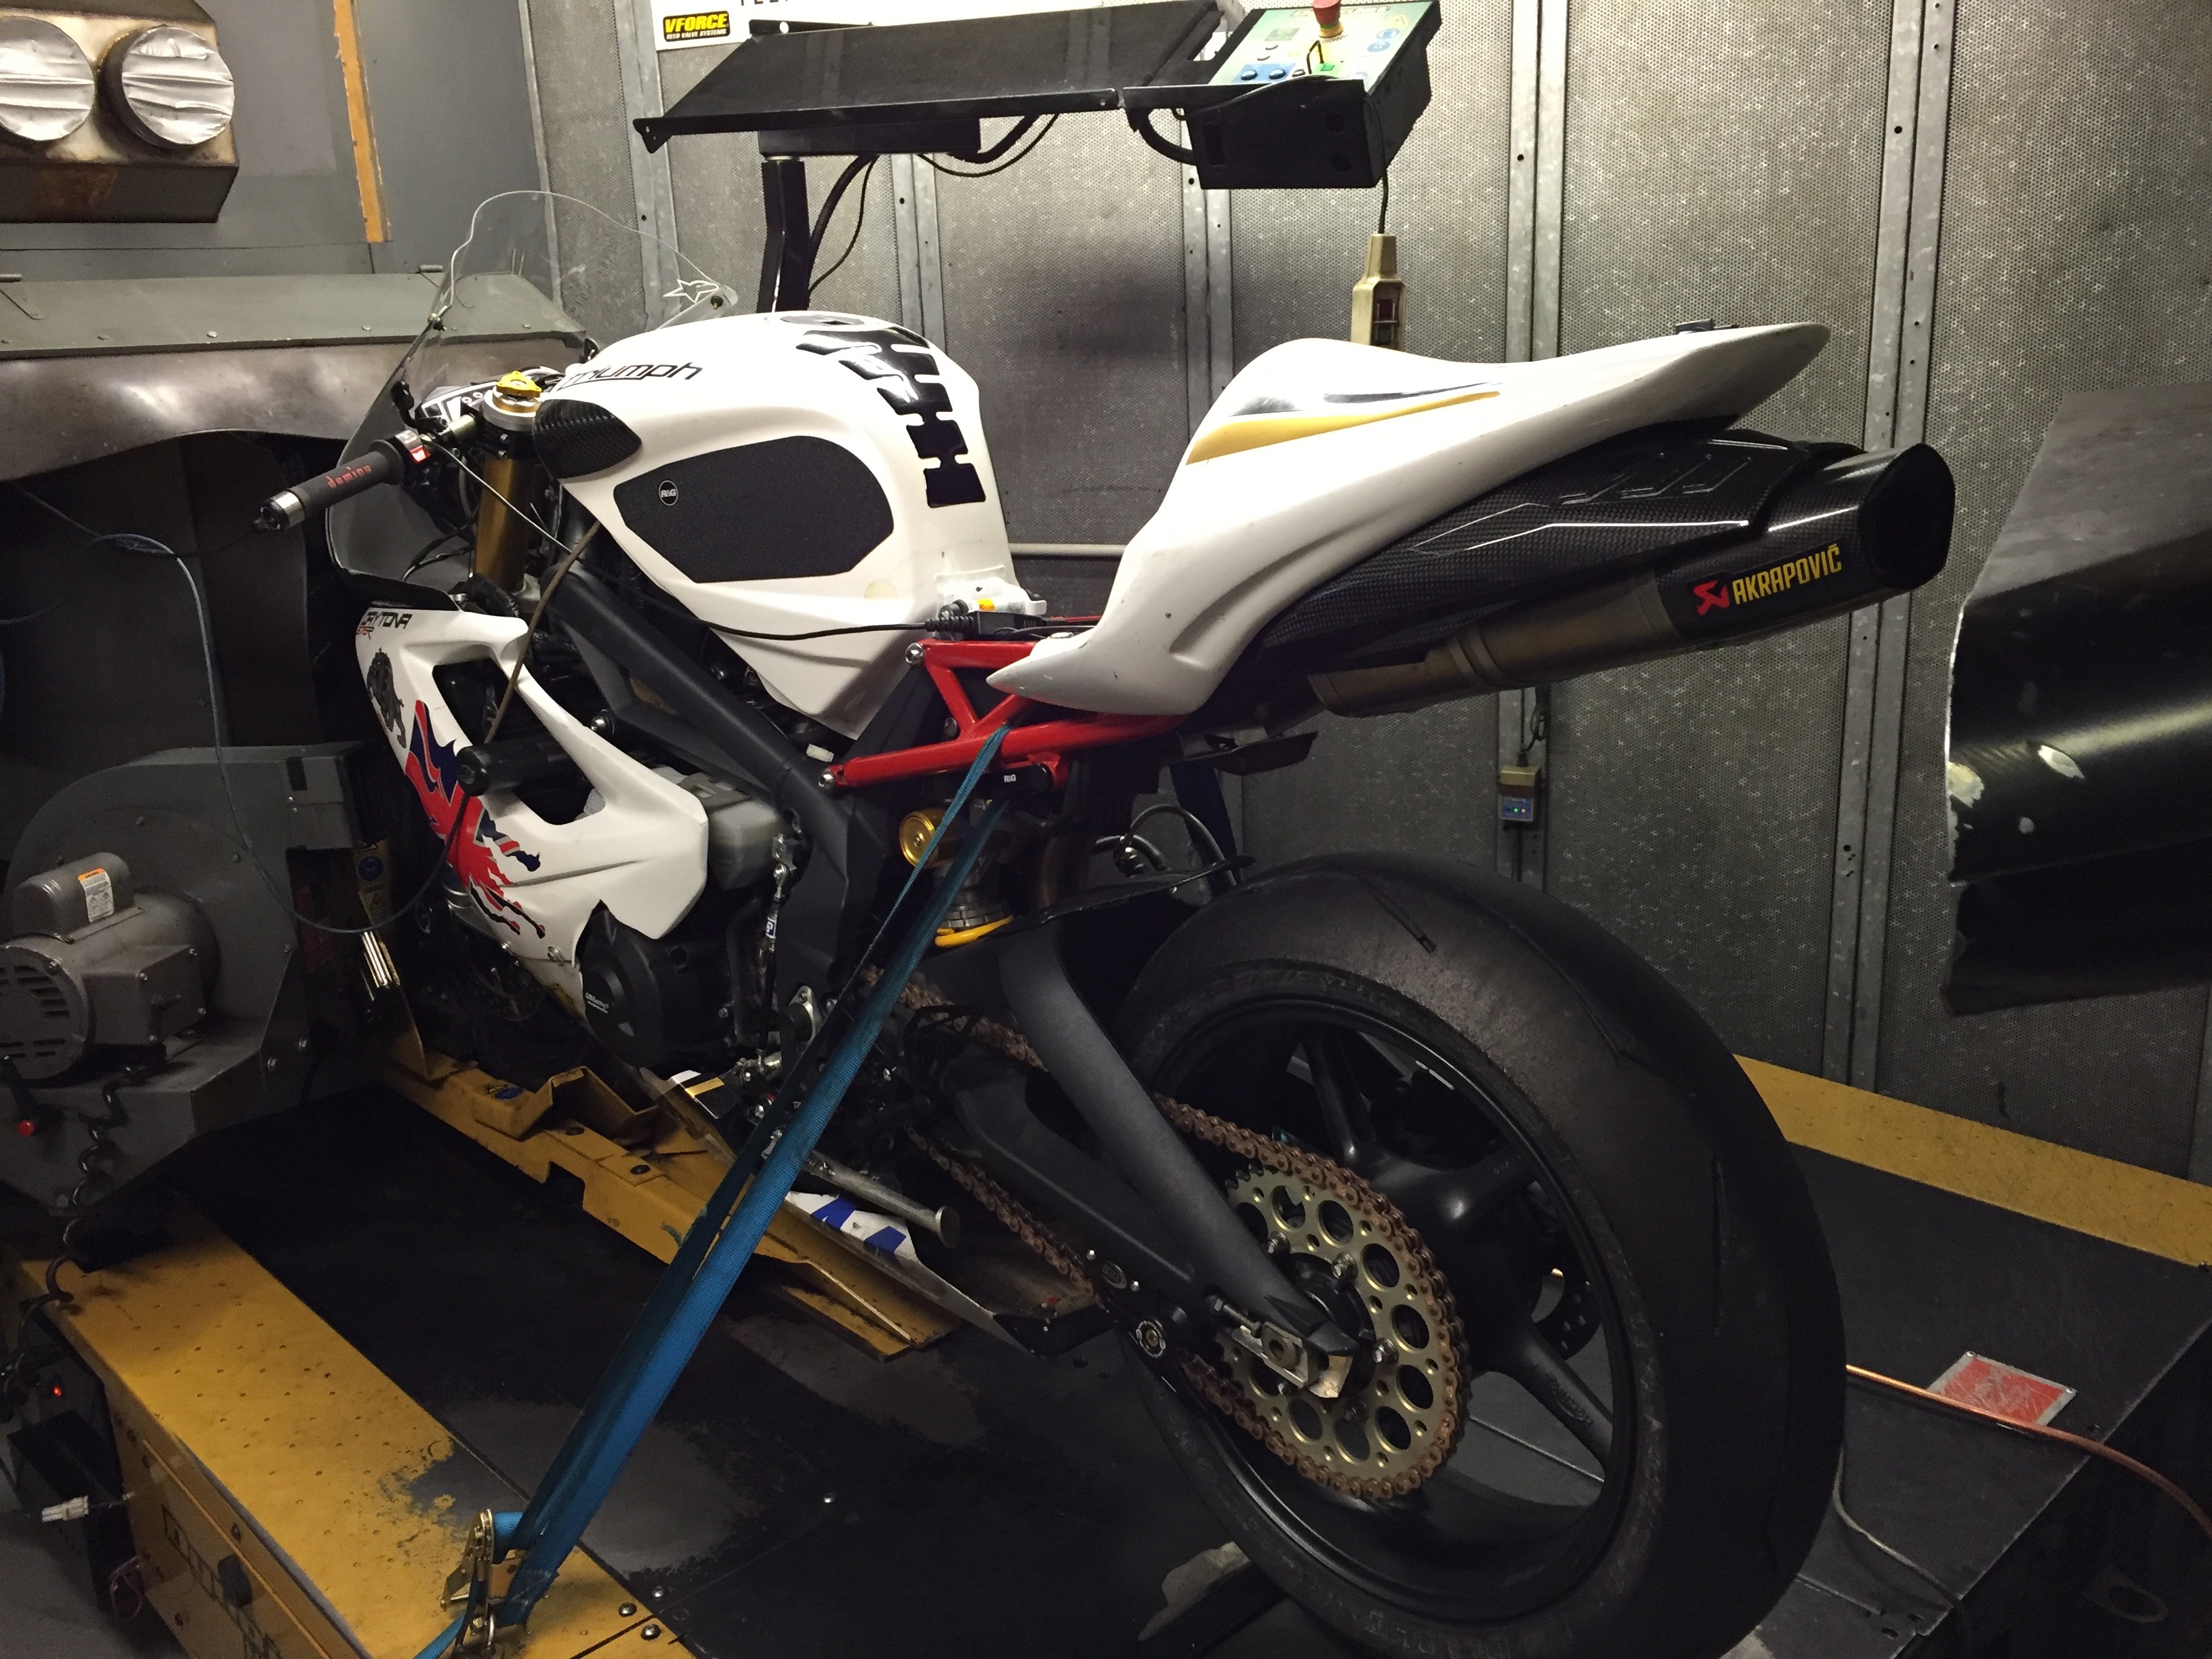 Triumph 675 Daytona track bike ECU remap; switch off all the emissions interference for a lovely power delivery